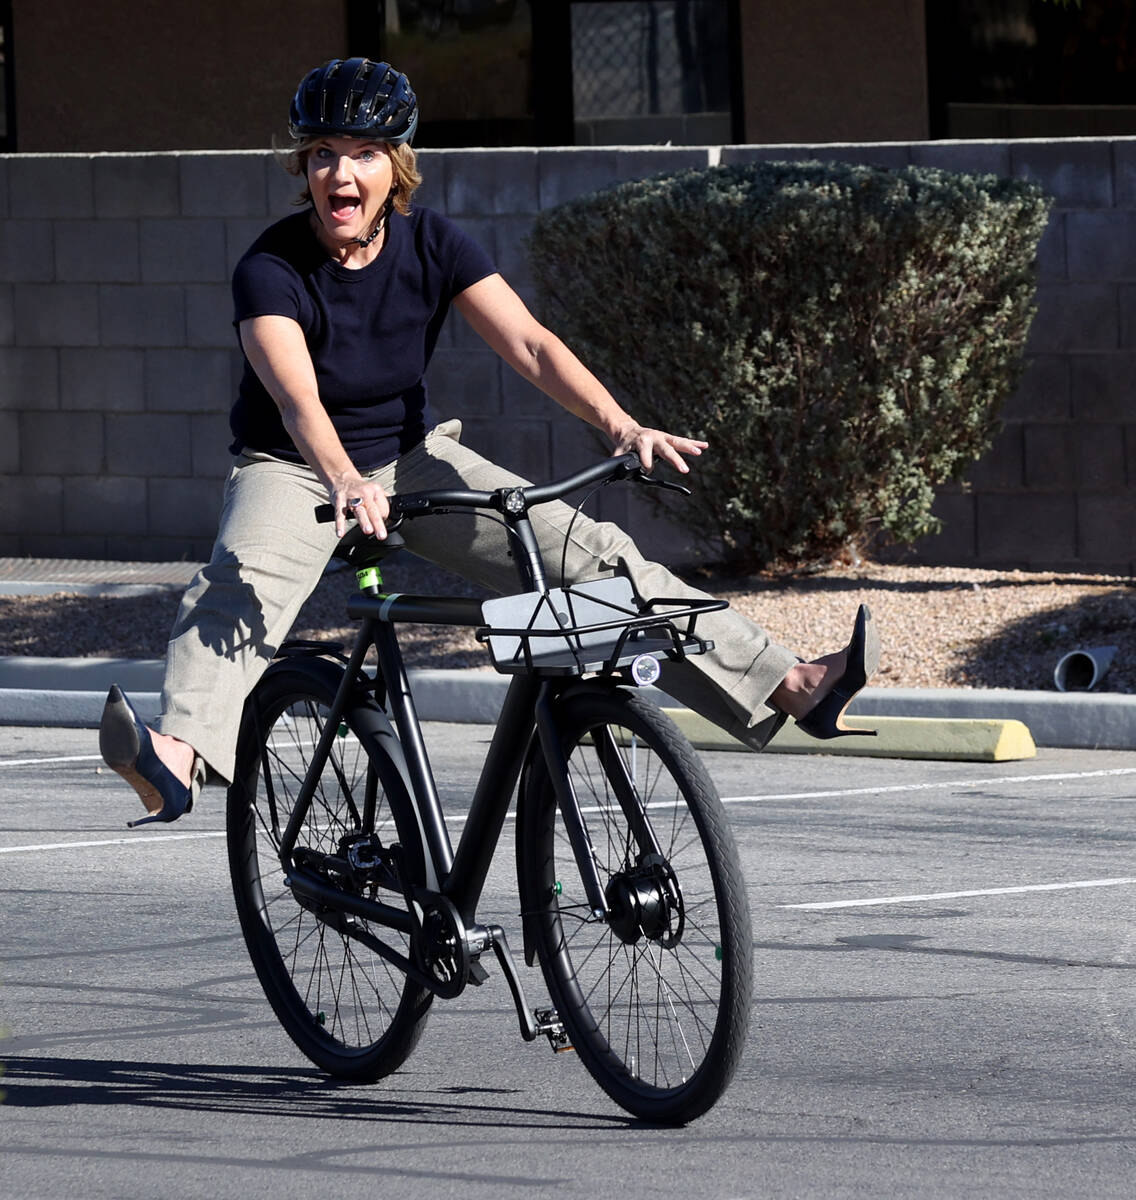 U.S. Rep. Susie Lee, D-Nev. rides an electric bike during a news conference related to the rece ...